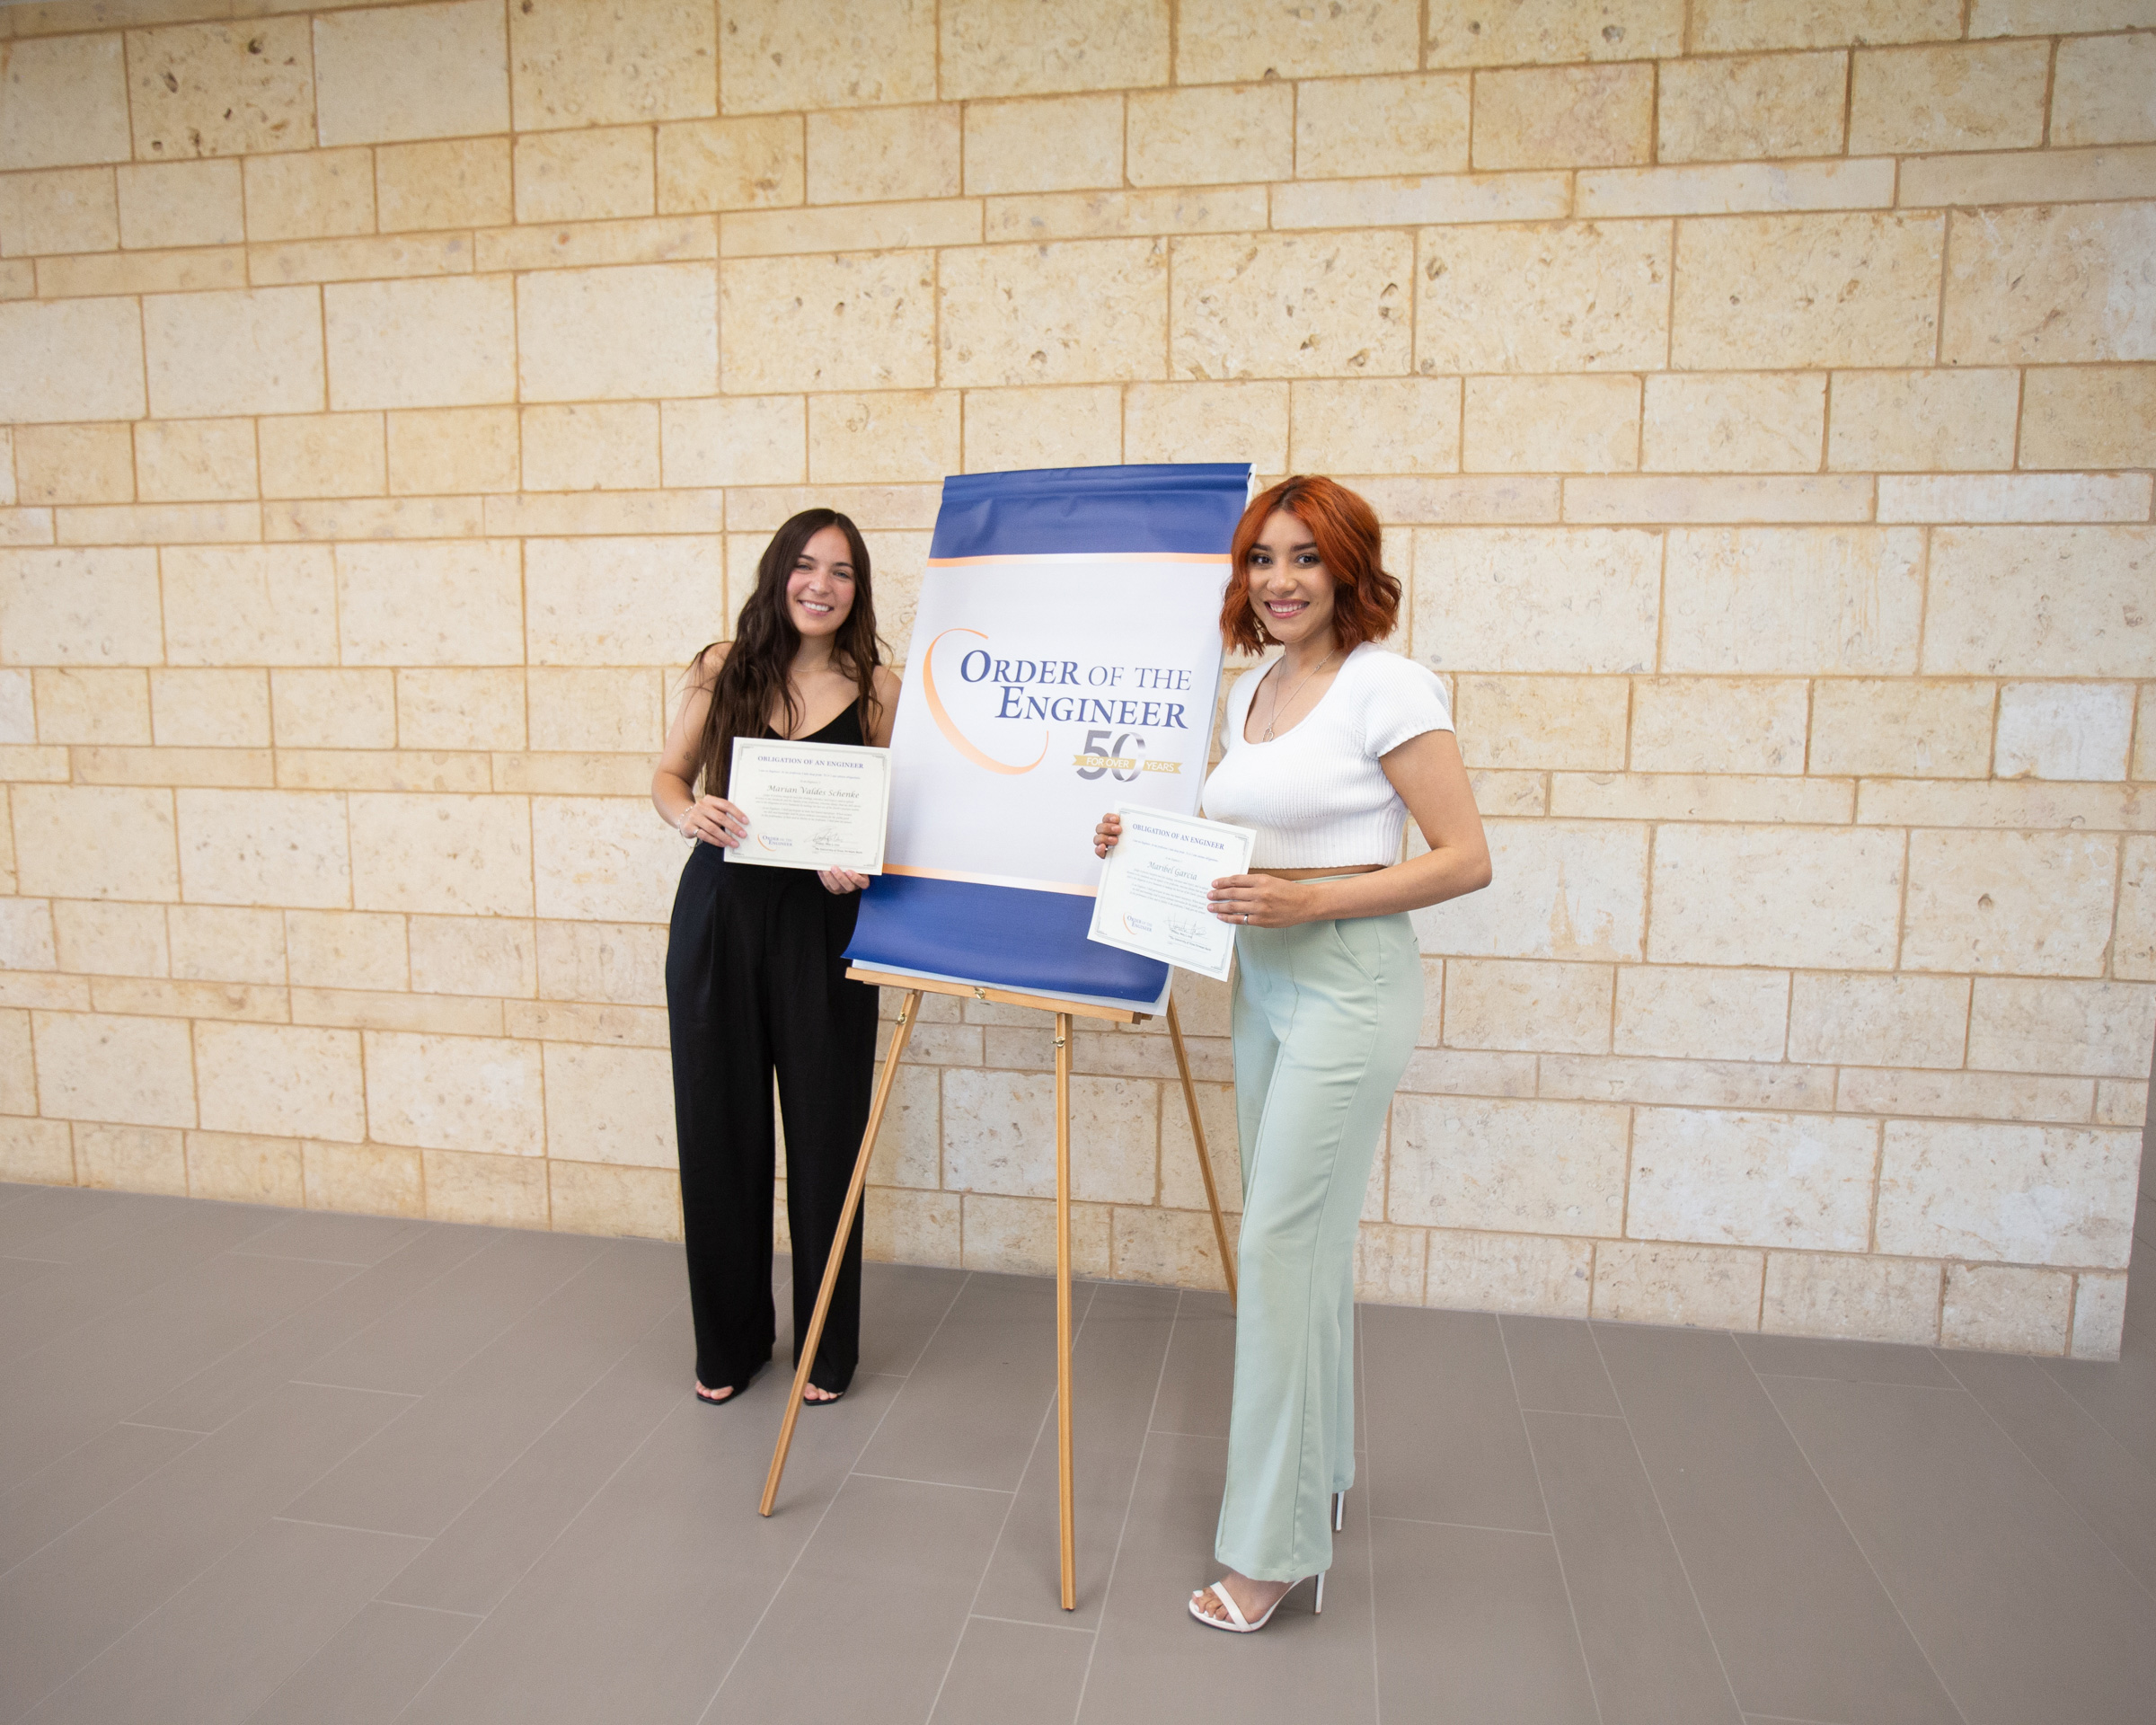 Two female engineering students posing with Order of the Engineer Certificates